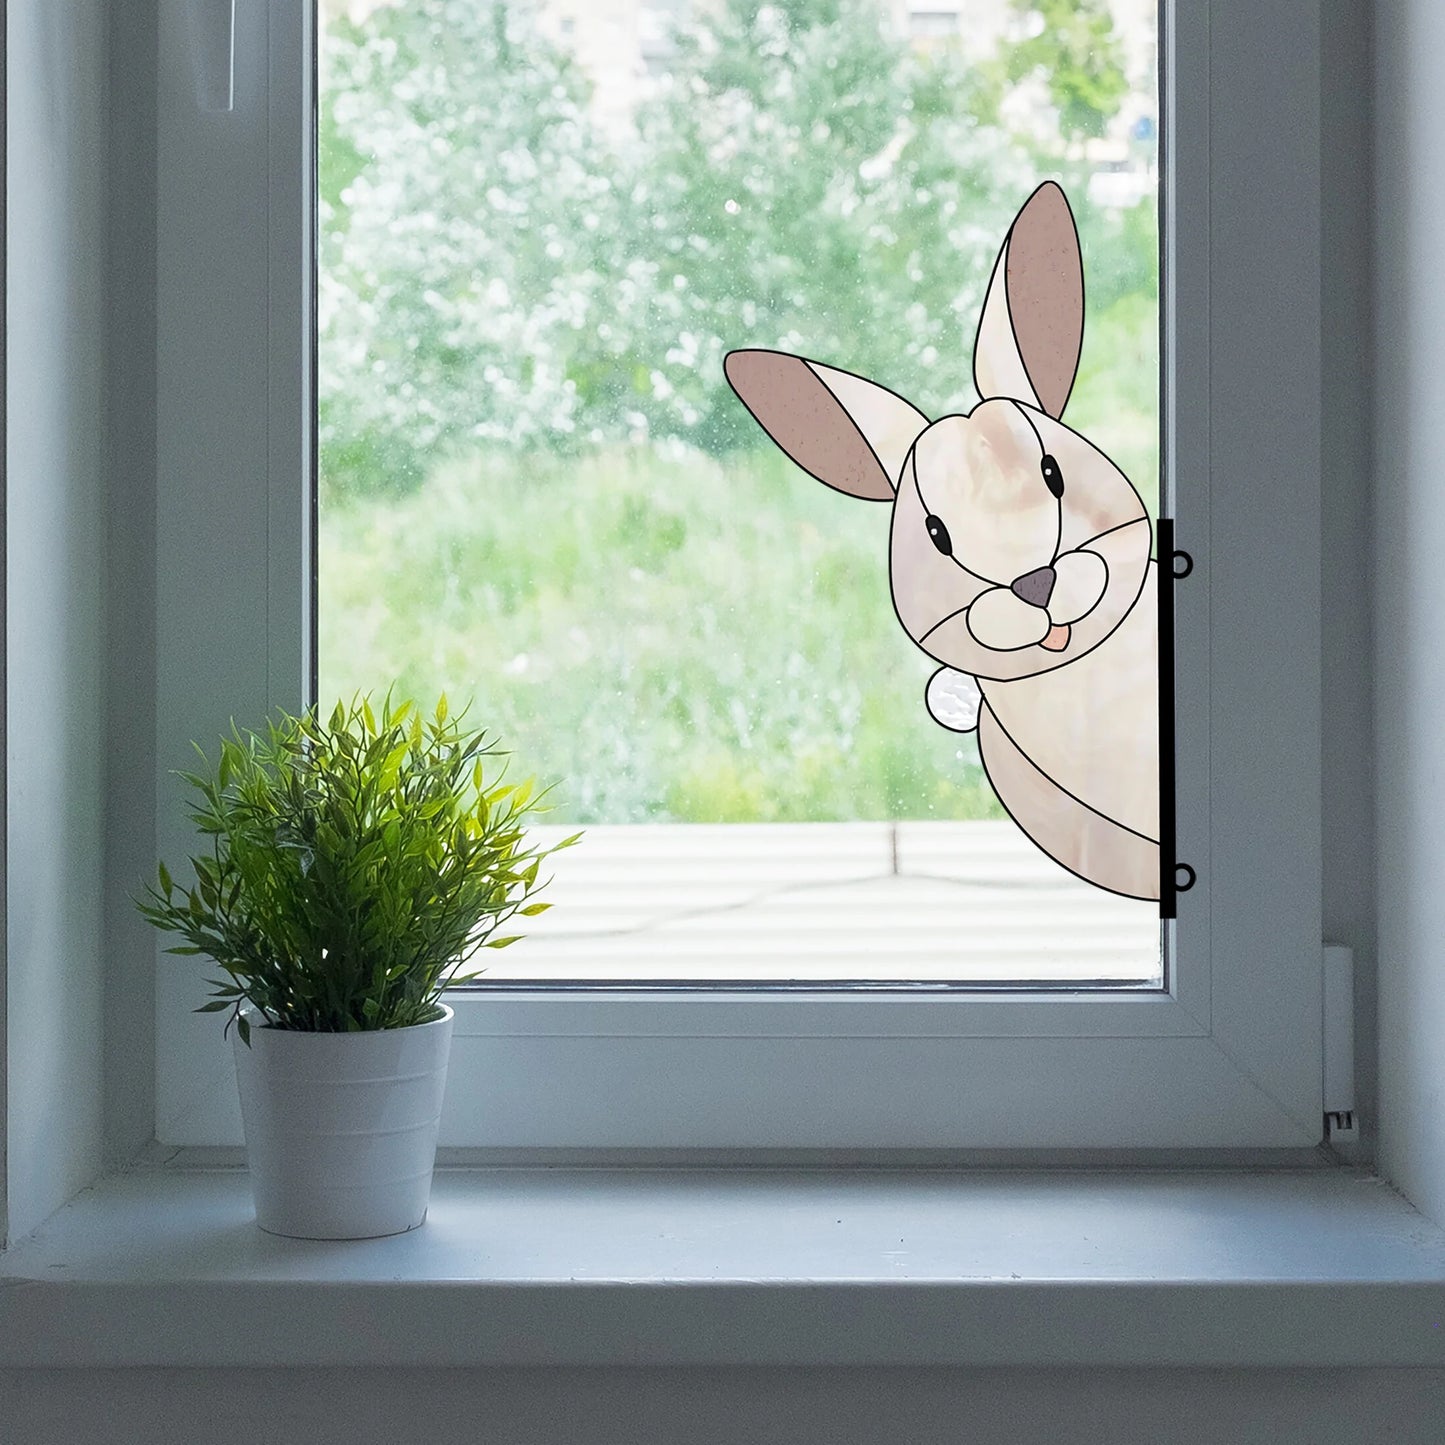 Animal stained glass patterns, rabbit, instant pdf downloads, one of four patterns in the pack, shown in a window